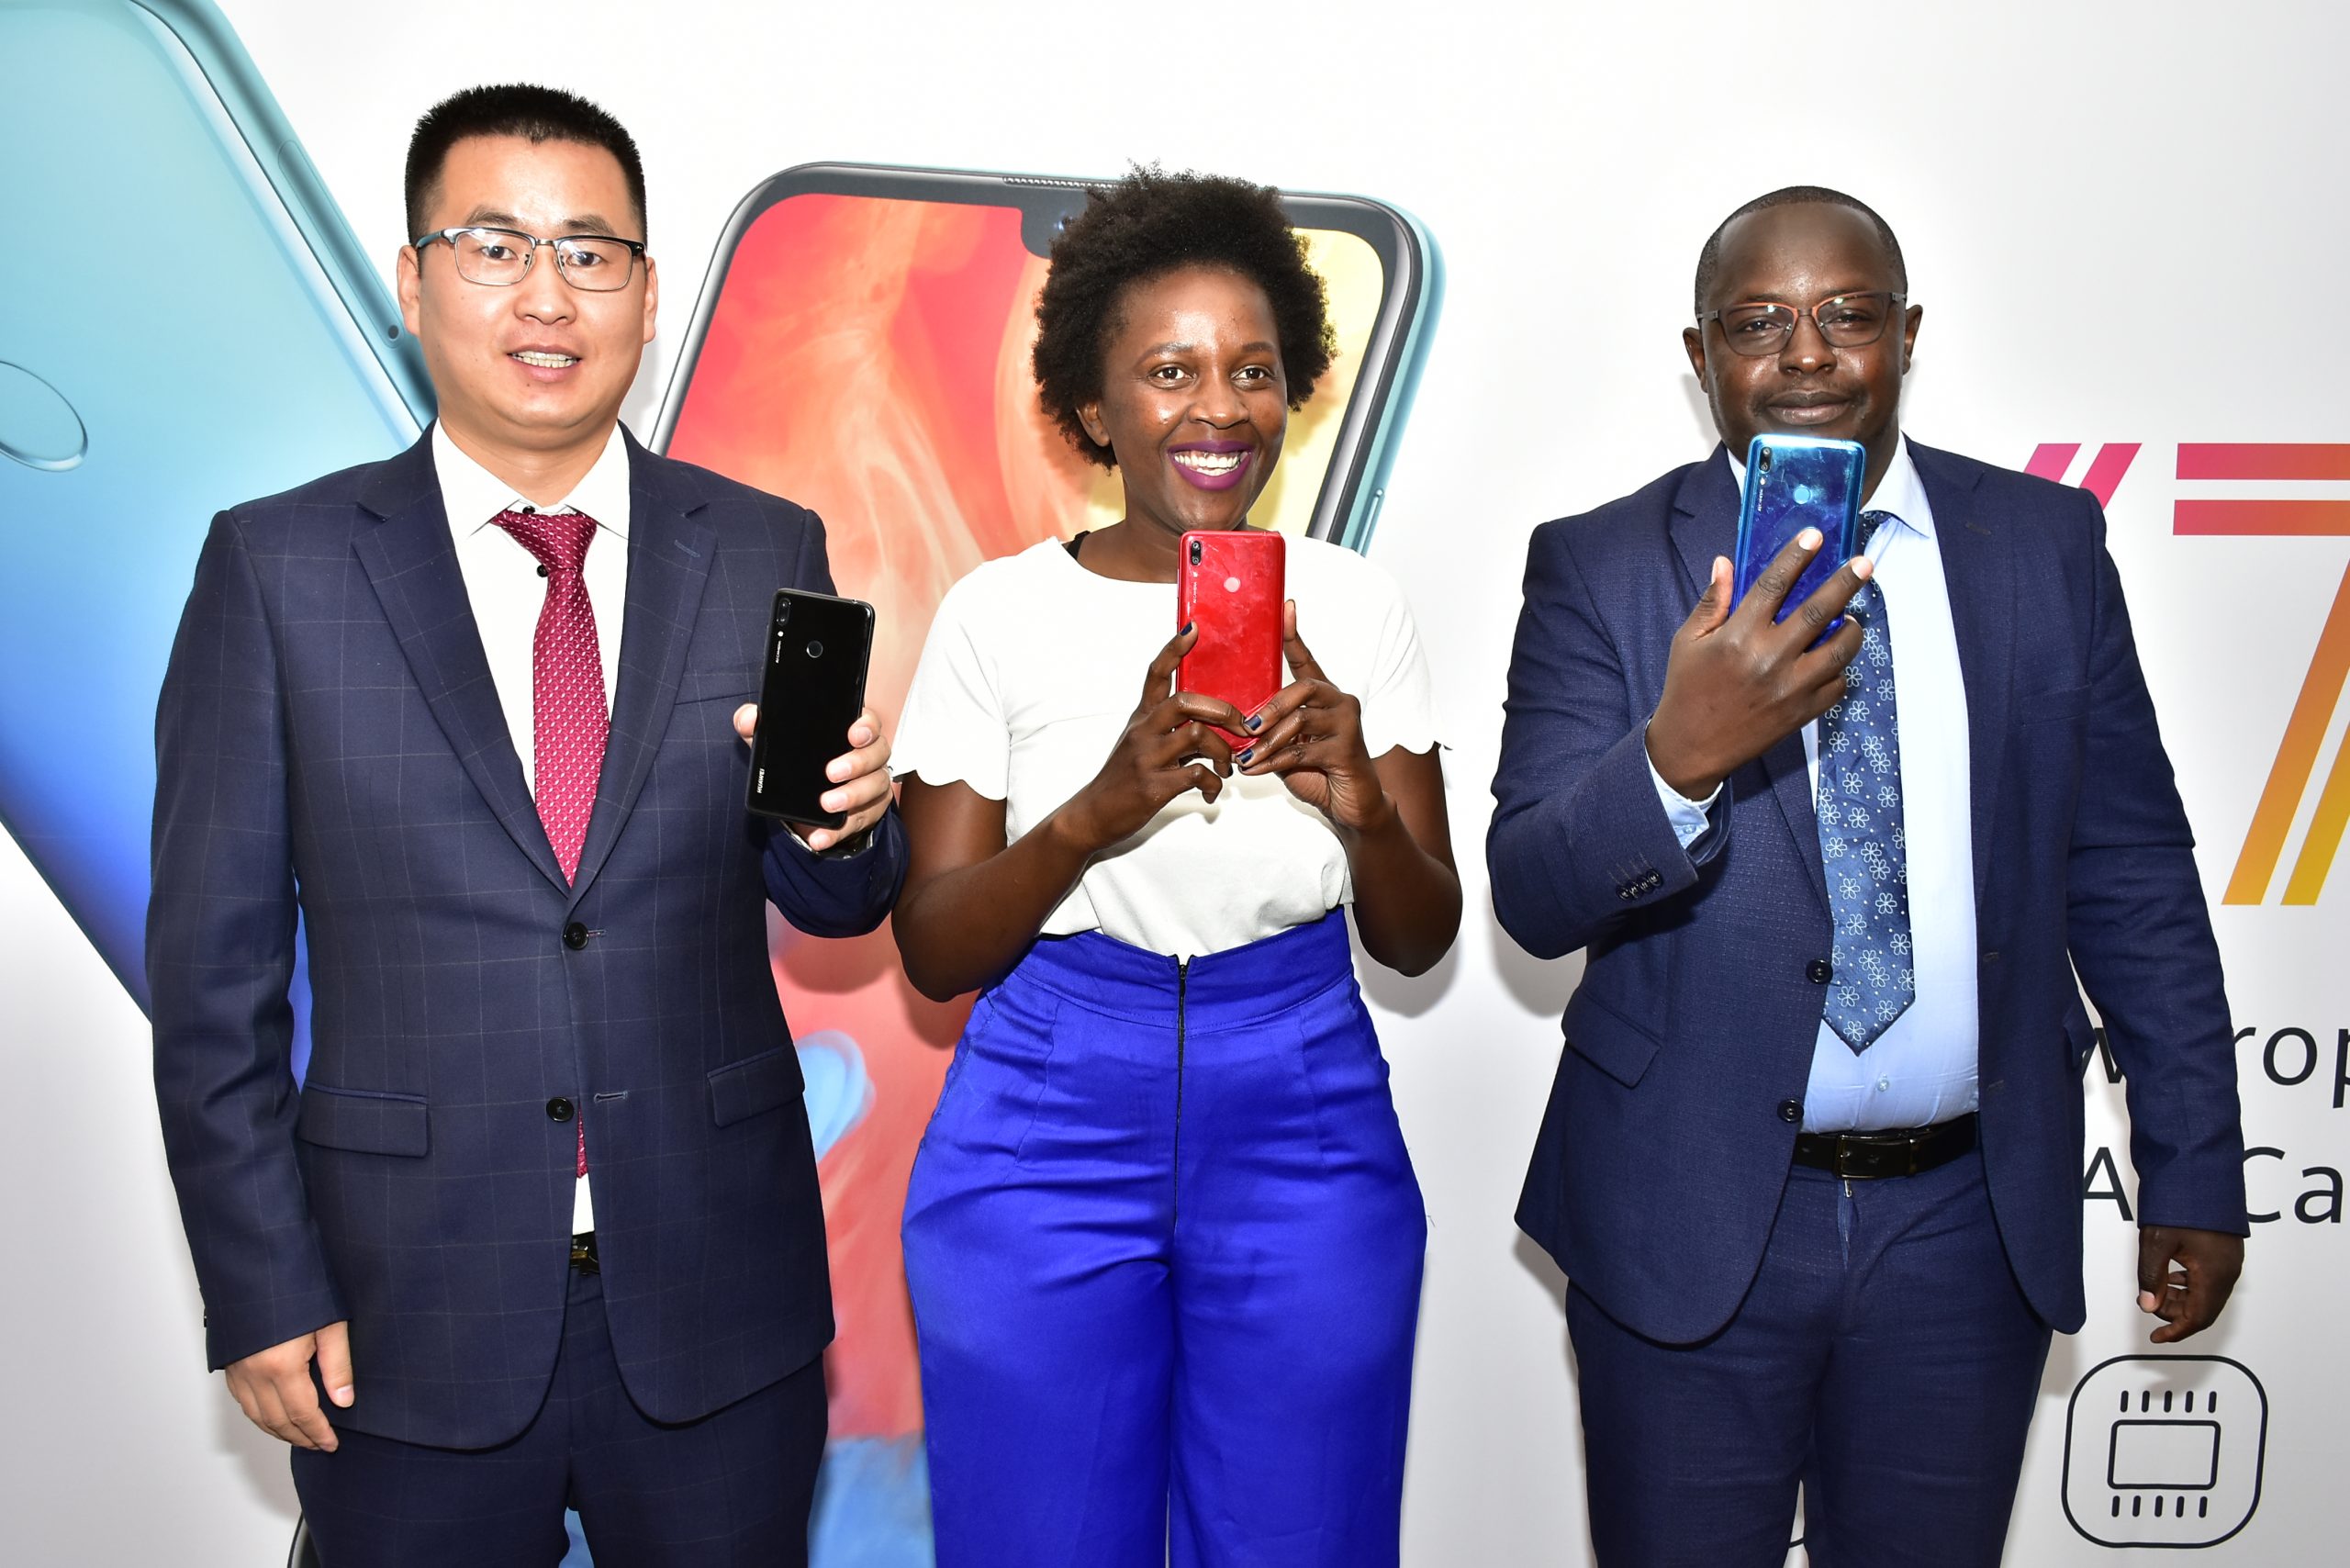 Huawei, Kenya’s Lipa Later partner to make Y7 Prime available on hire purchase